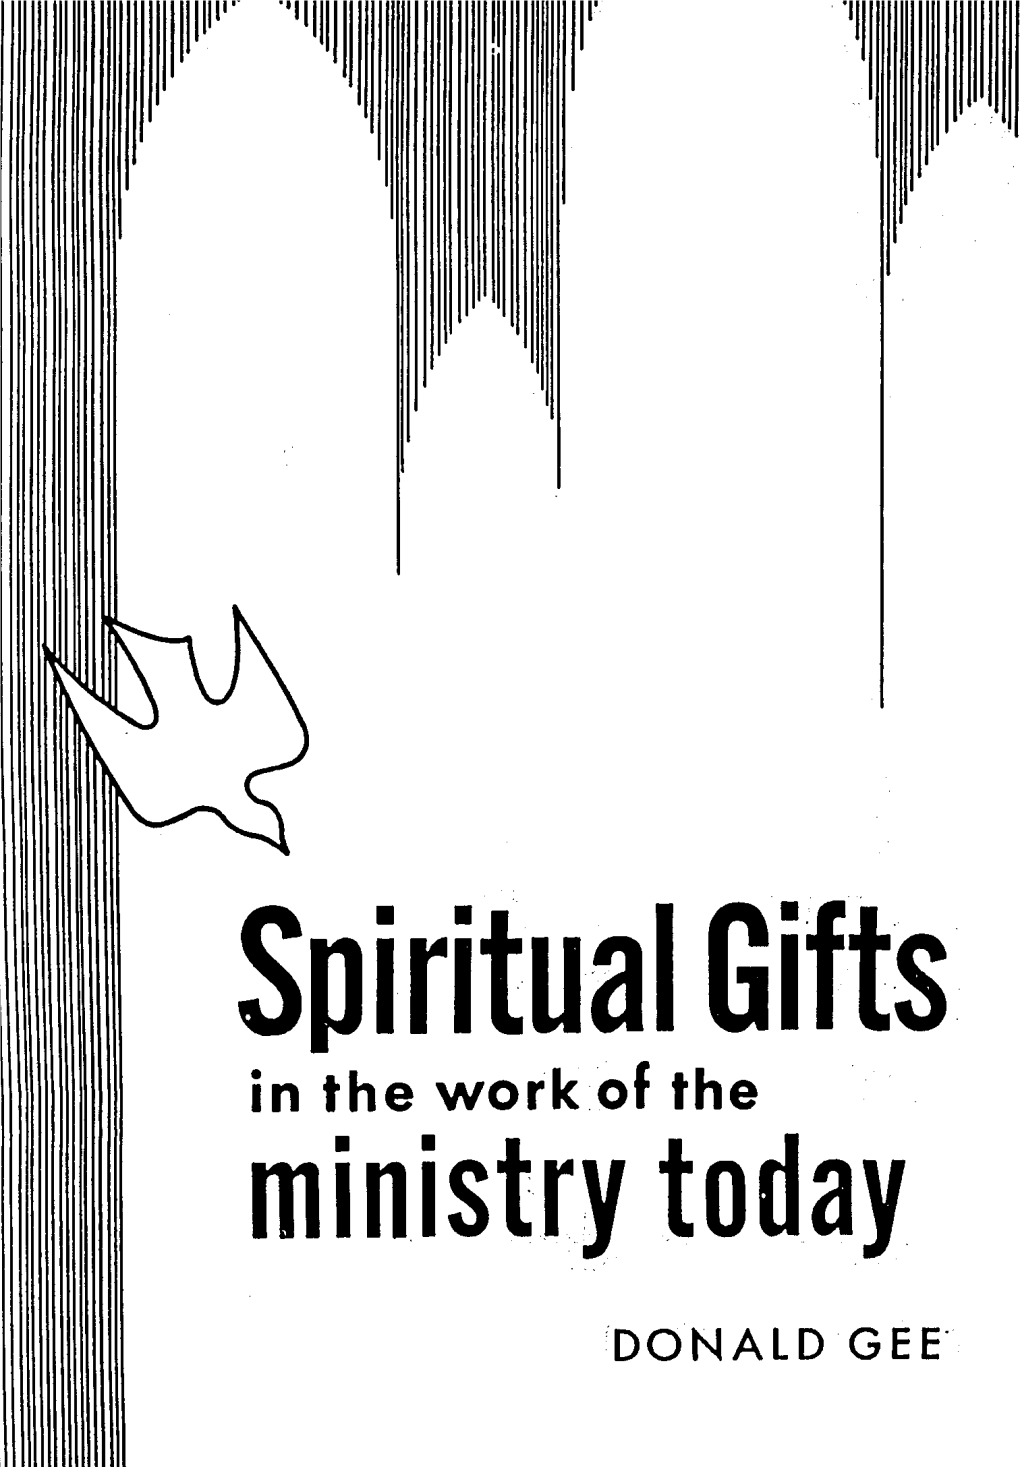 Spiritual Gifts in the Work of the Ministry Today